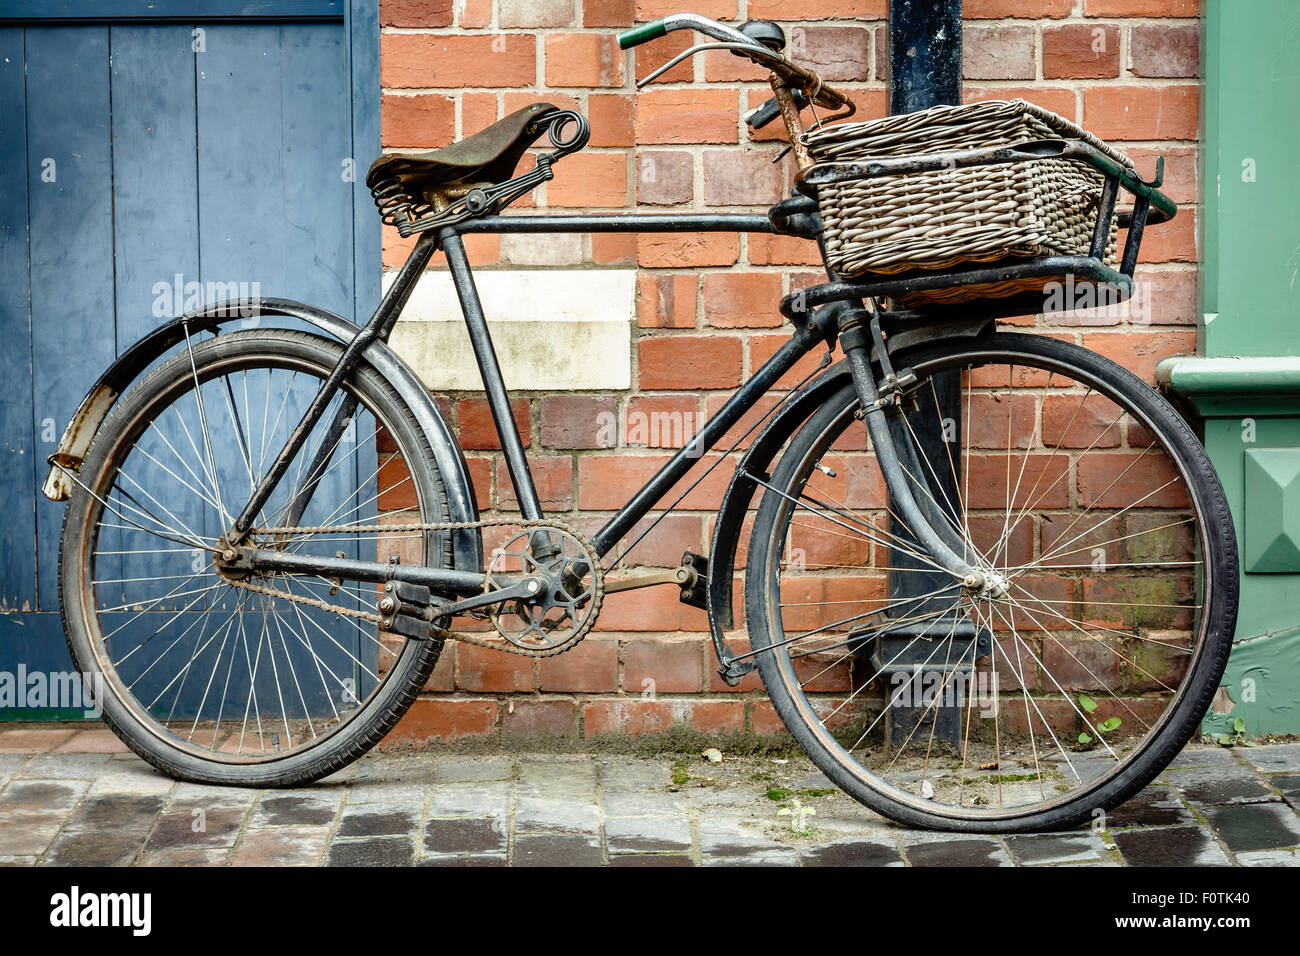 Old retro cycle with basket leaning against a brick wall Stock Photo